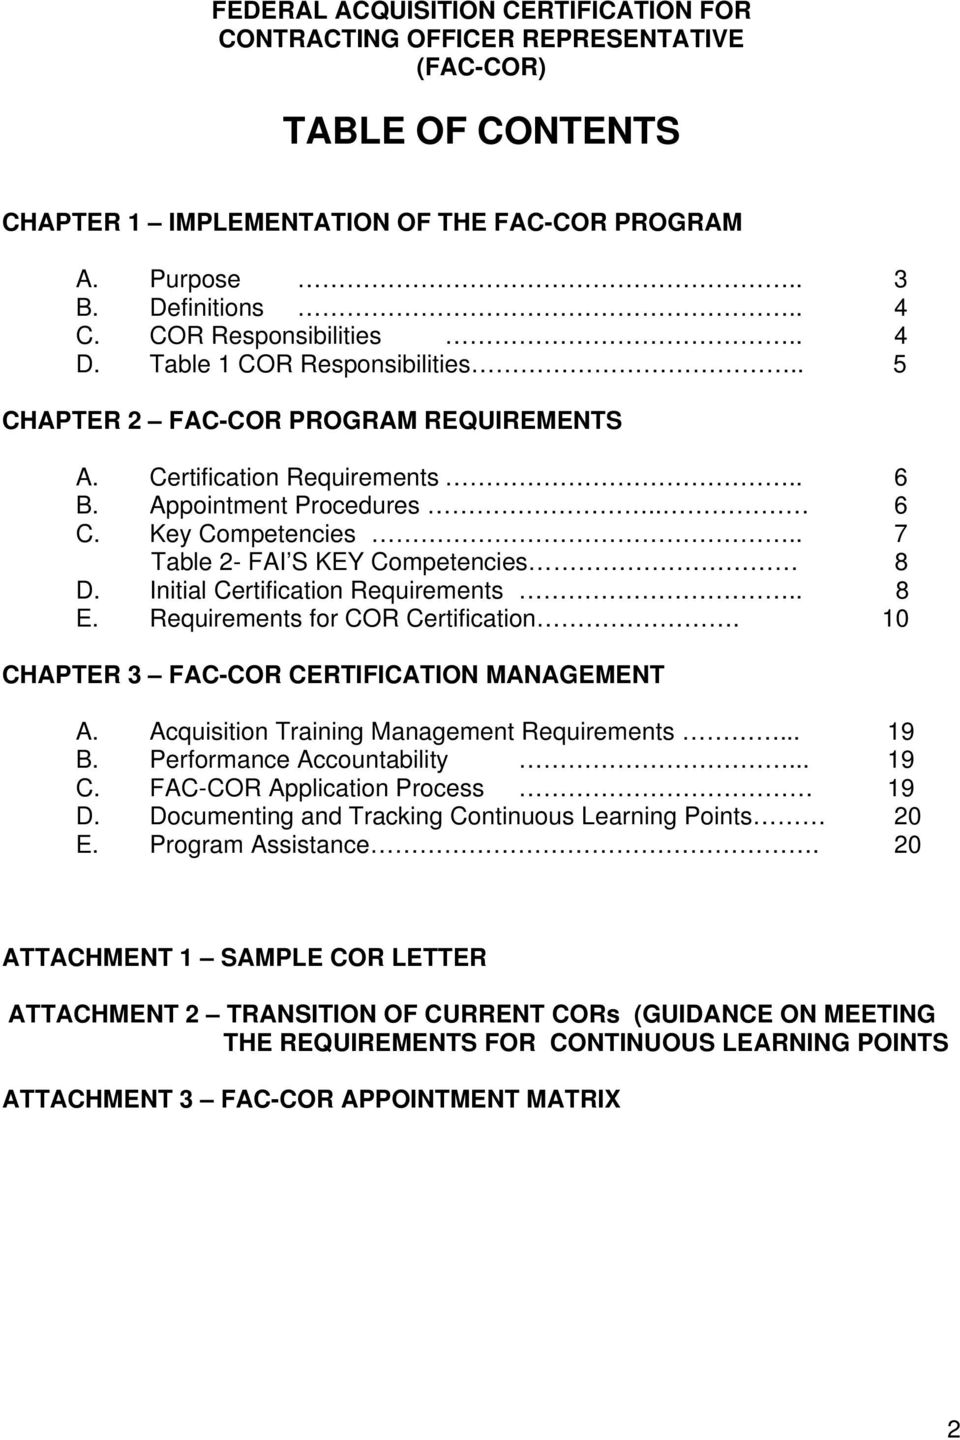 . 7 Table 2- FAI S KEY Competencies 8 D. Initial Certification Requirements.. 8 E. Requirements for COR Certification. 10 CHAPTER 3 FAC-COR CERTIFICATION MANAGEMENT A.